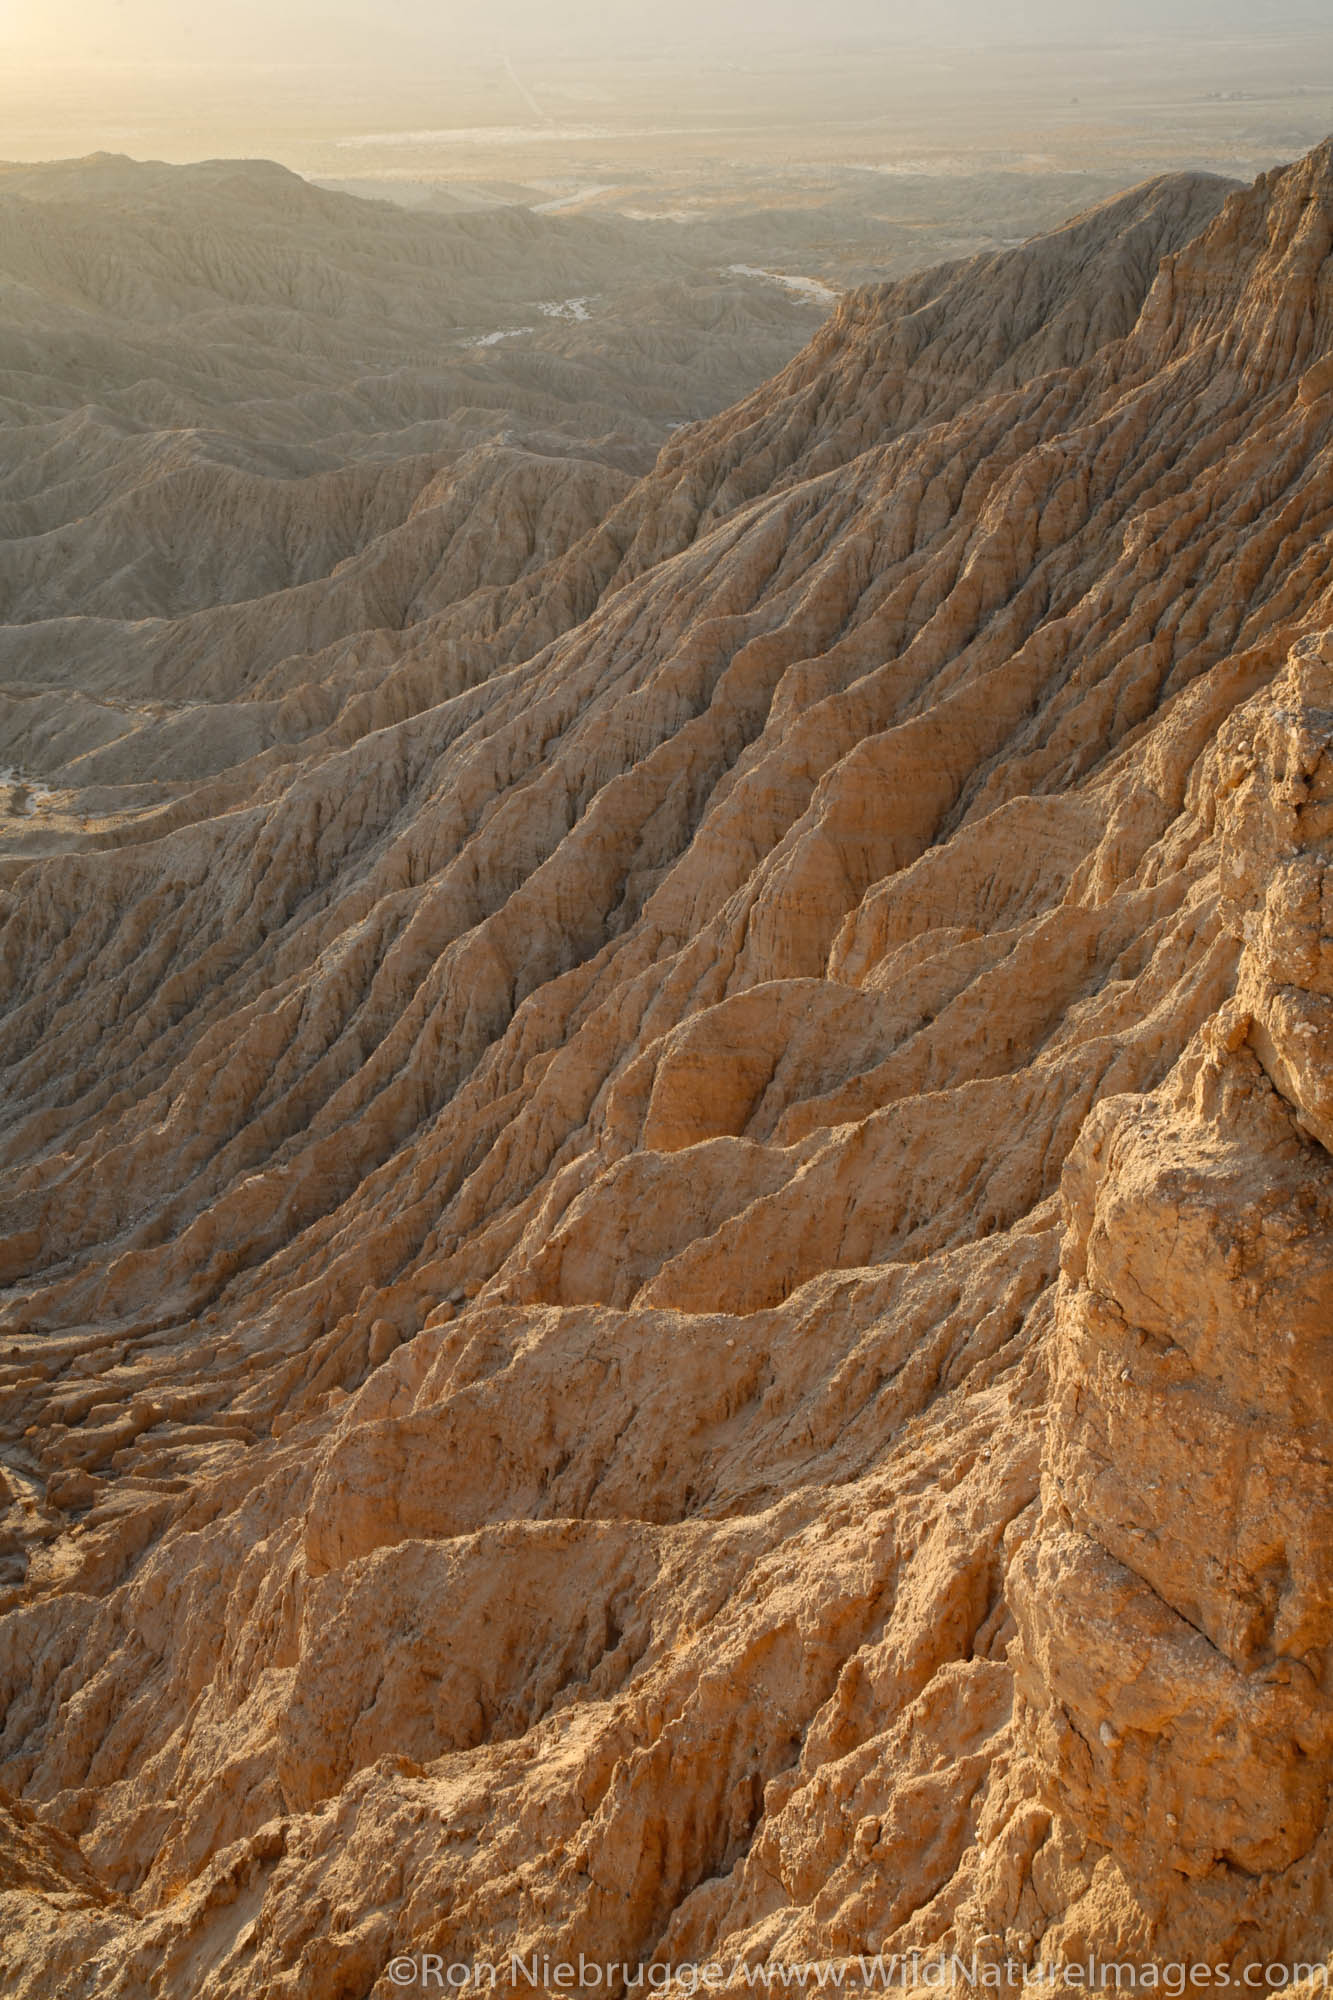 The Badlands from Font's Point, Anza-Borrego Desert State Park, California.